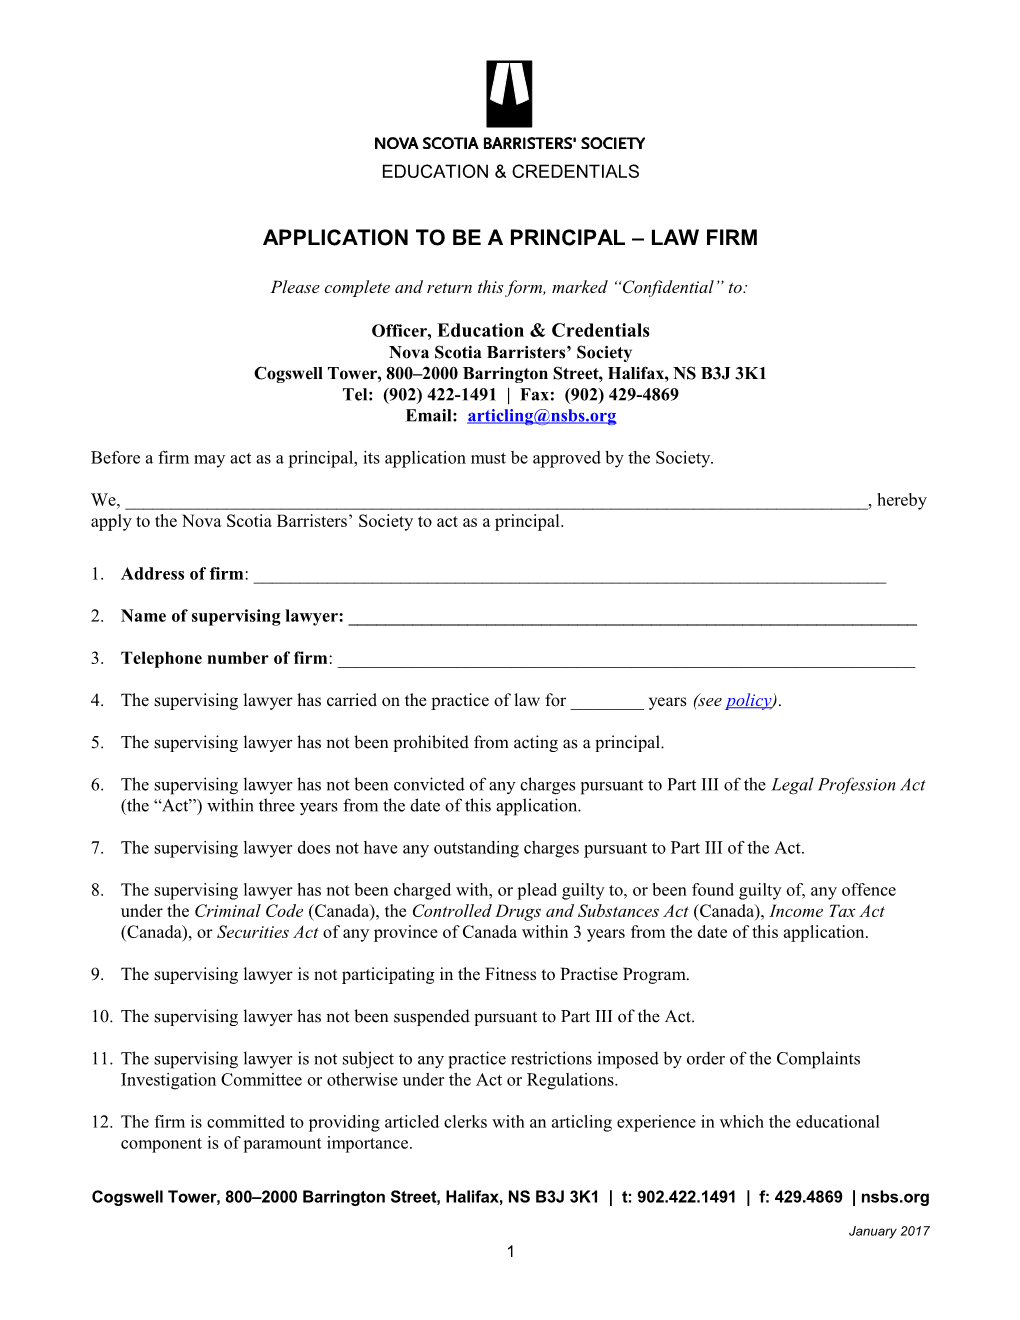 Application to Be a Principal Law Firm